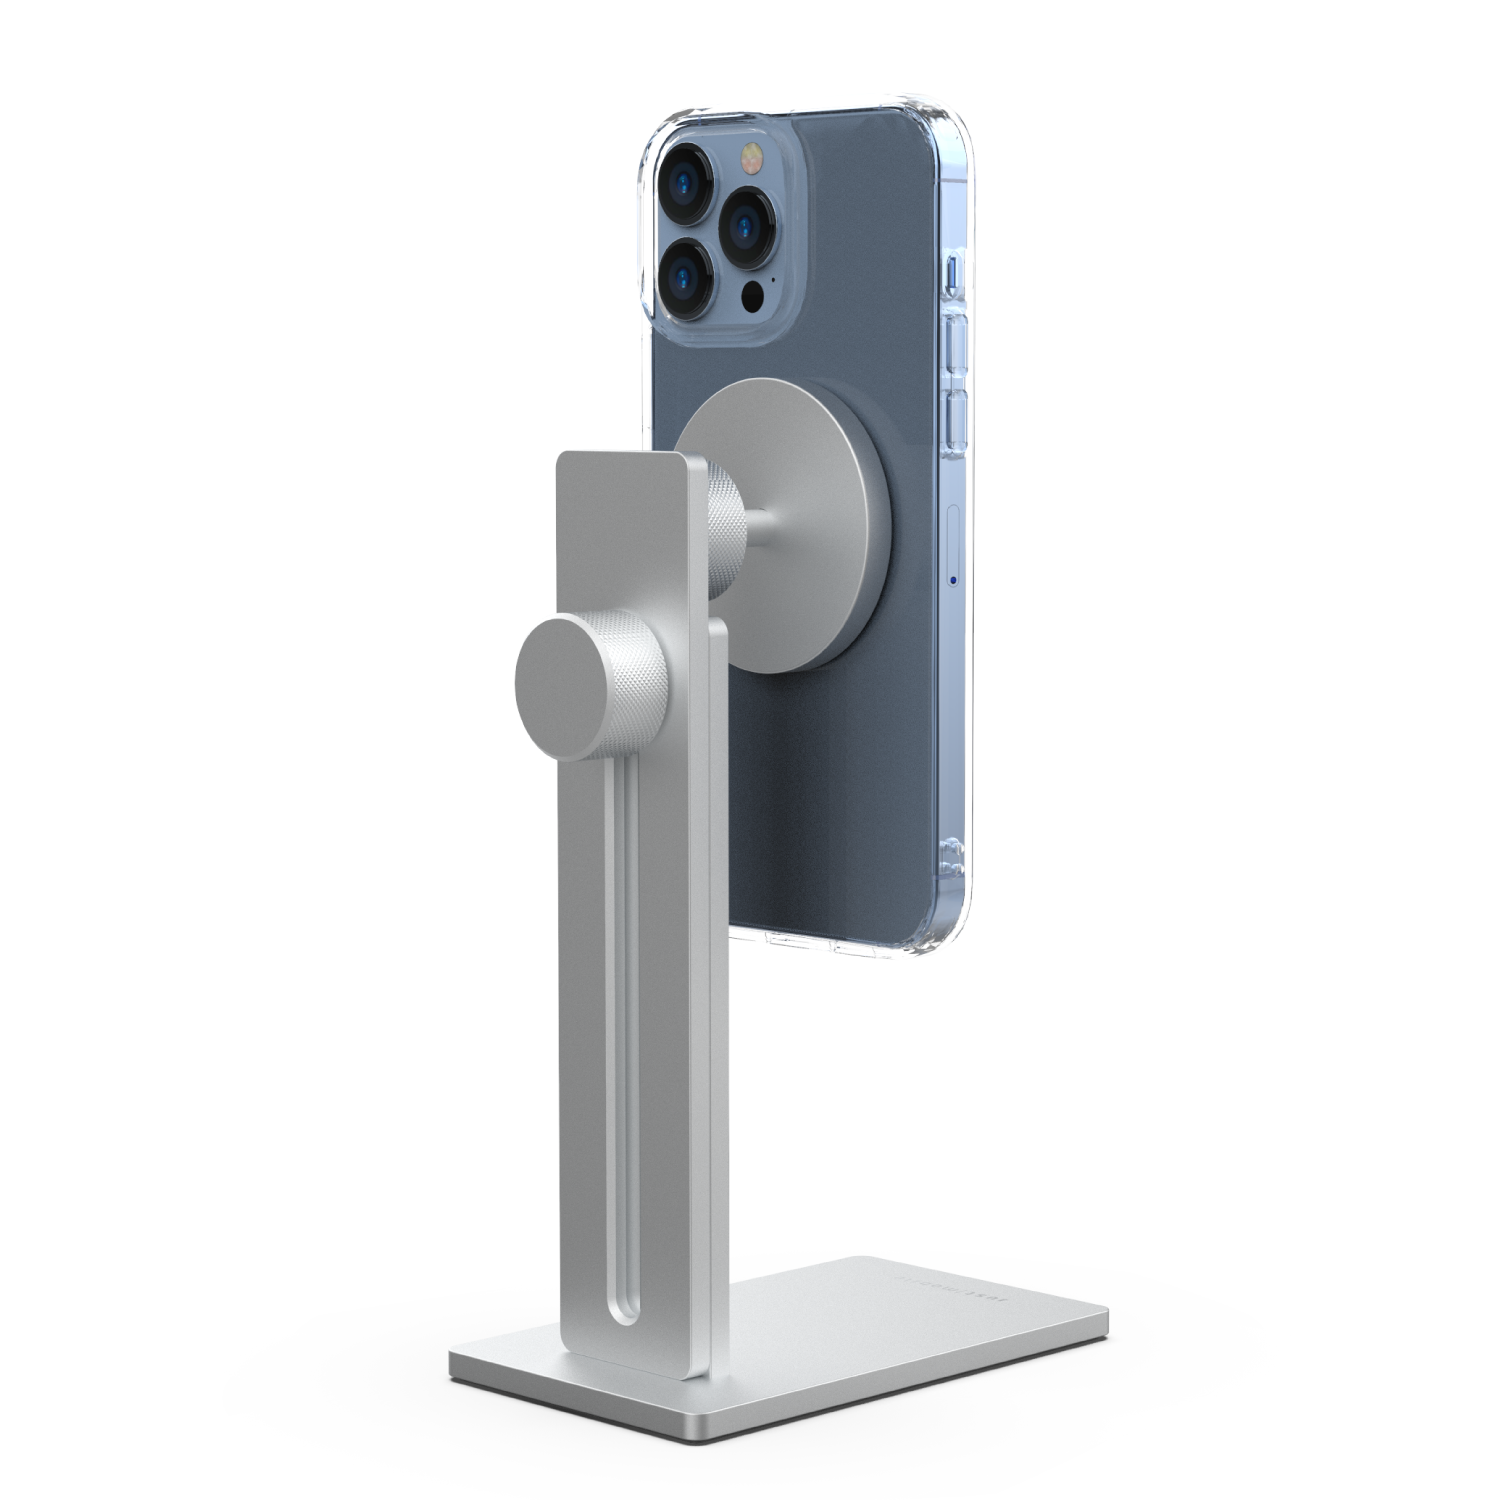 JustMobile AluDisc Pro Smartphone Stand - Storming Gravity